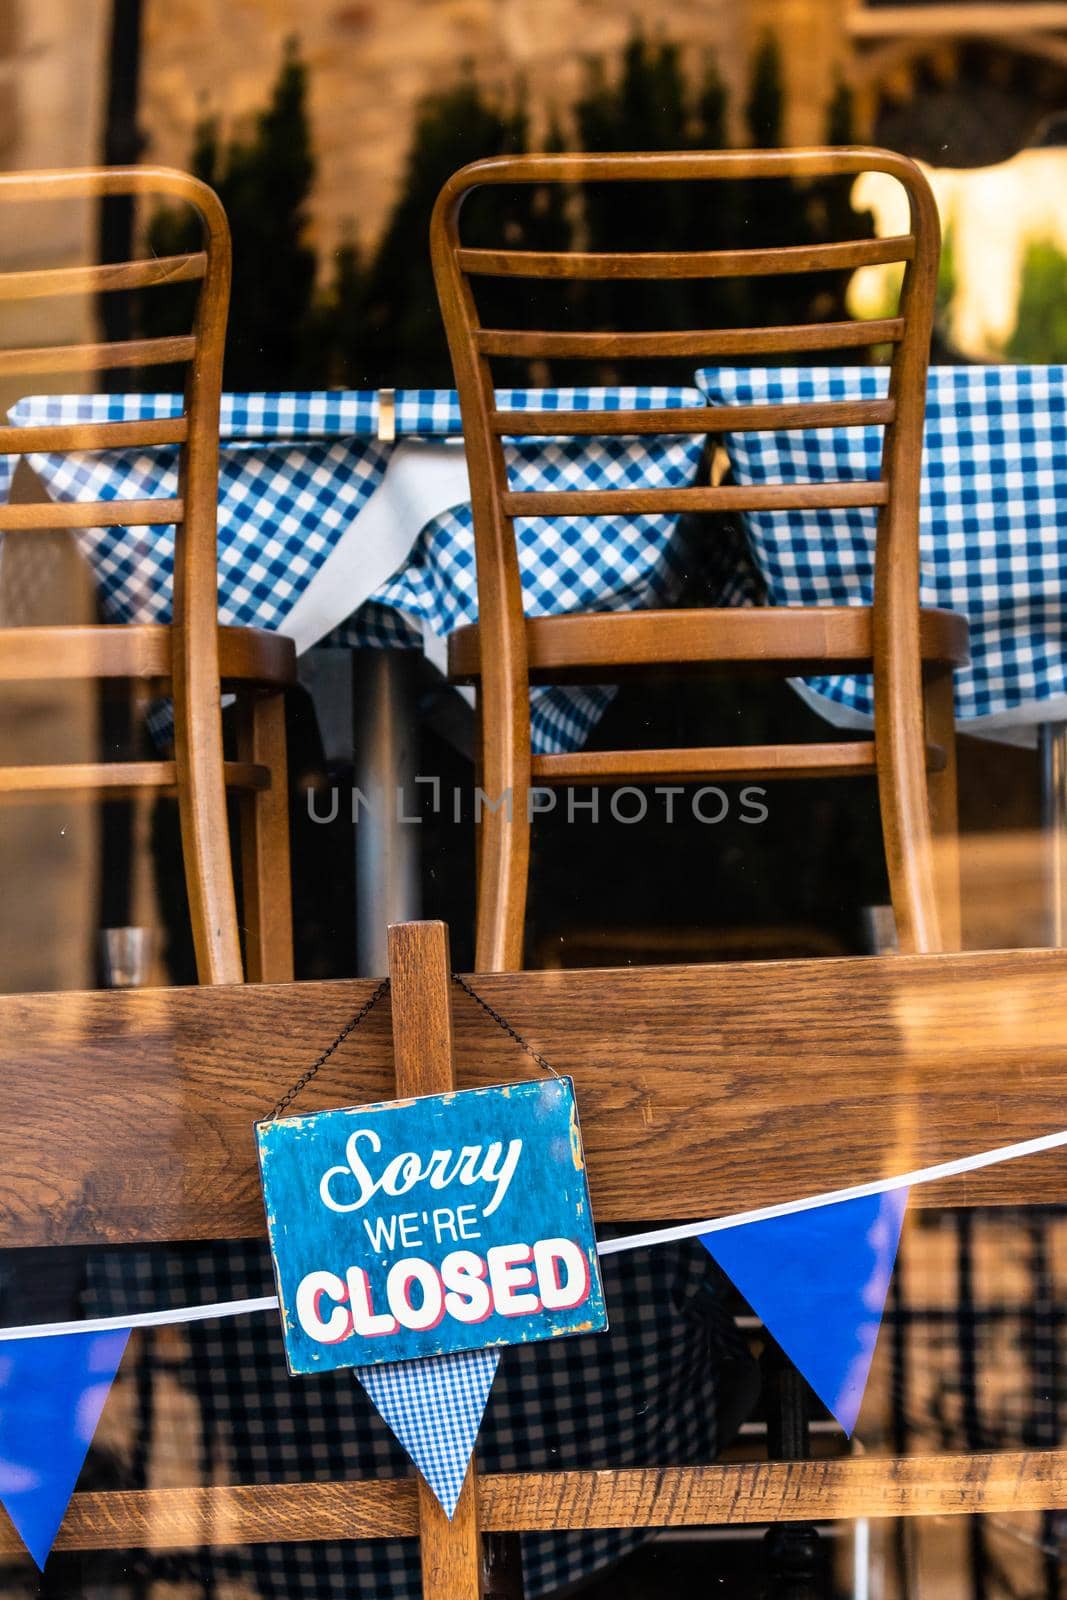 Sorry we are closed sign outside a restaurant during covid-19 lockdown by mauricallari